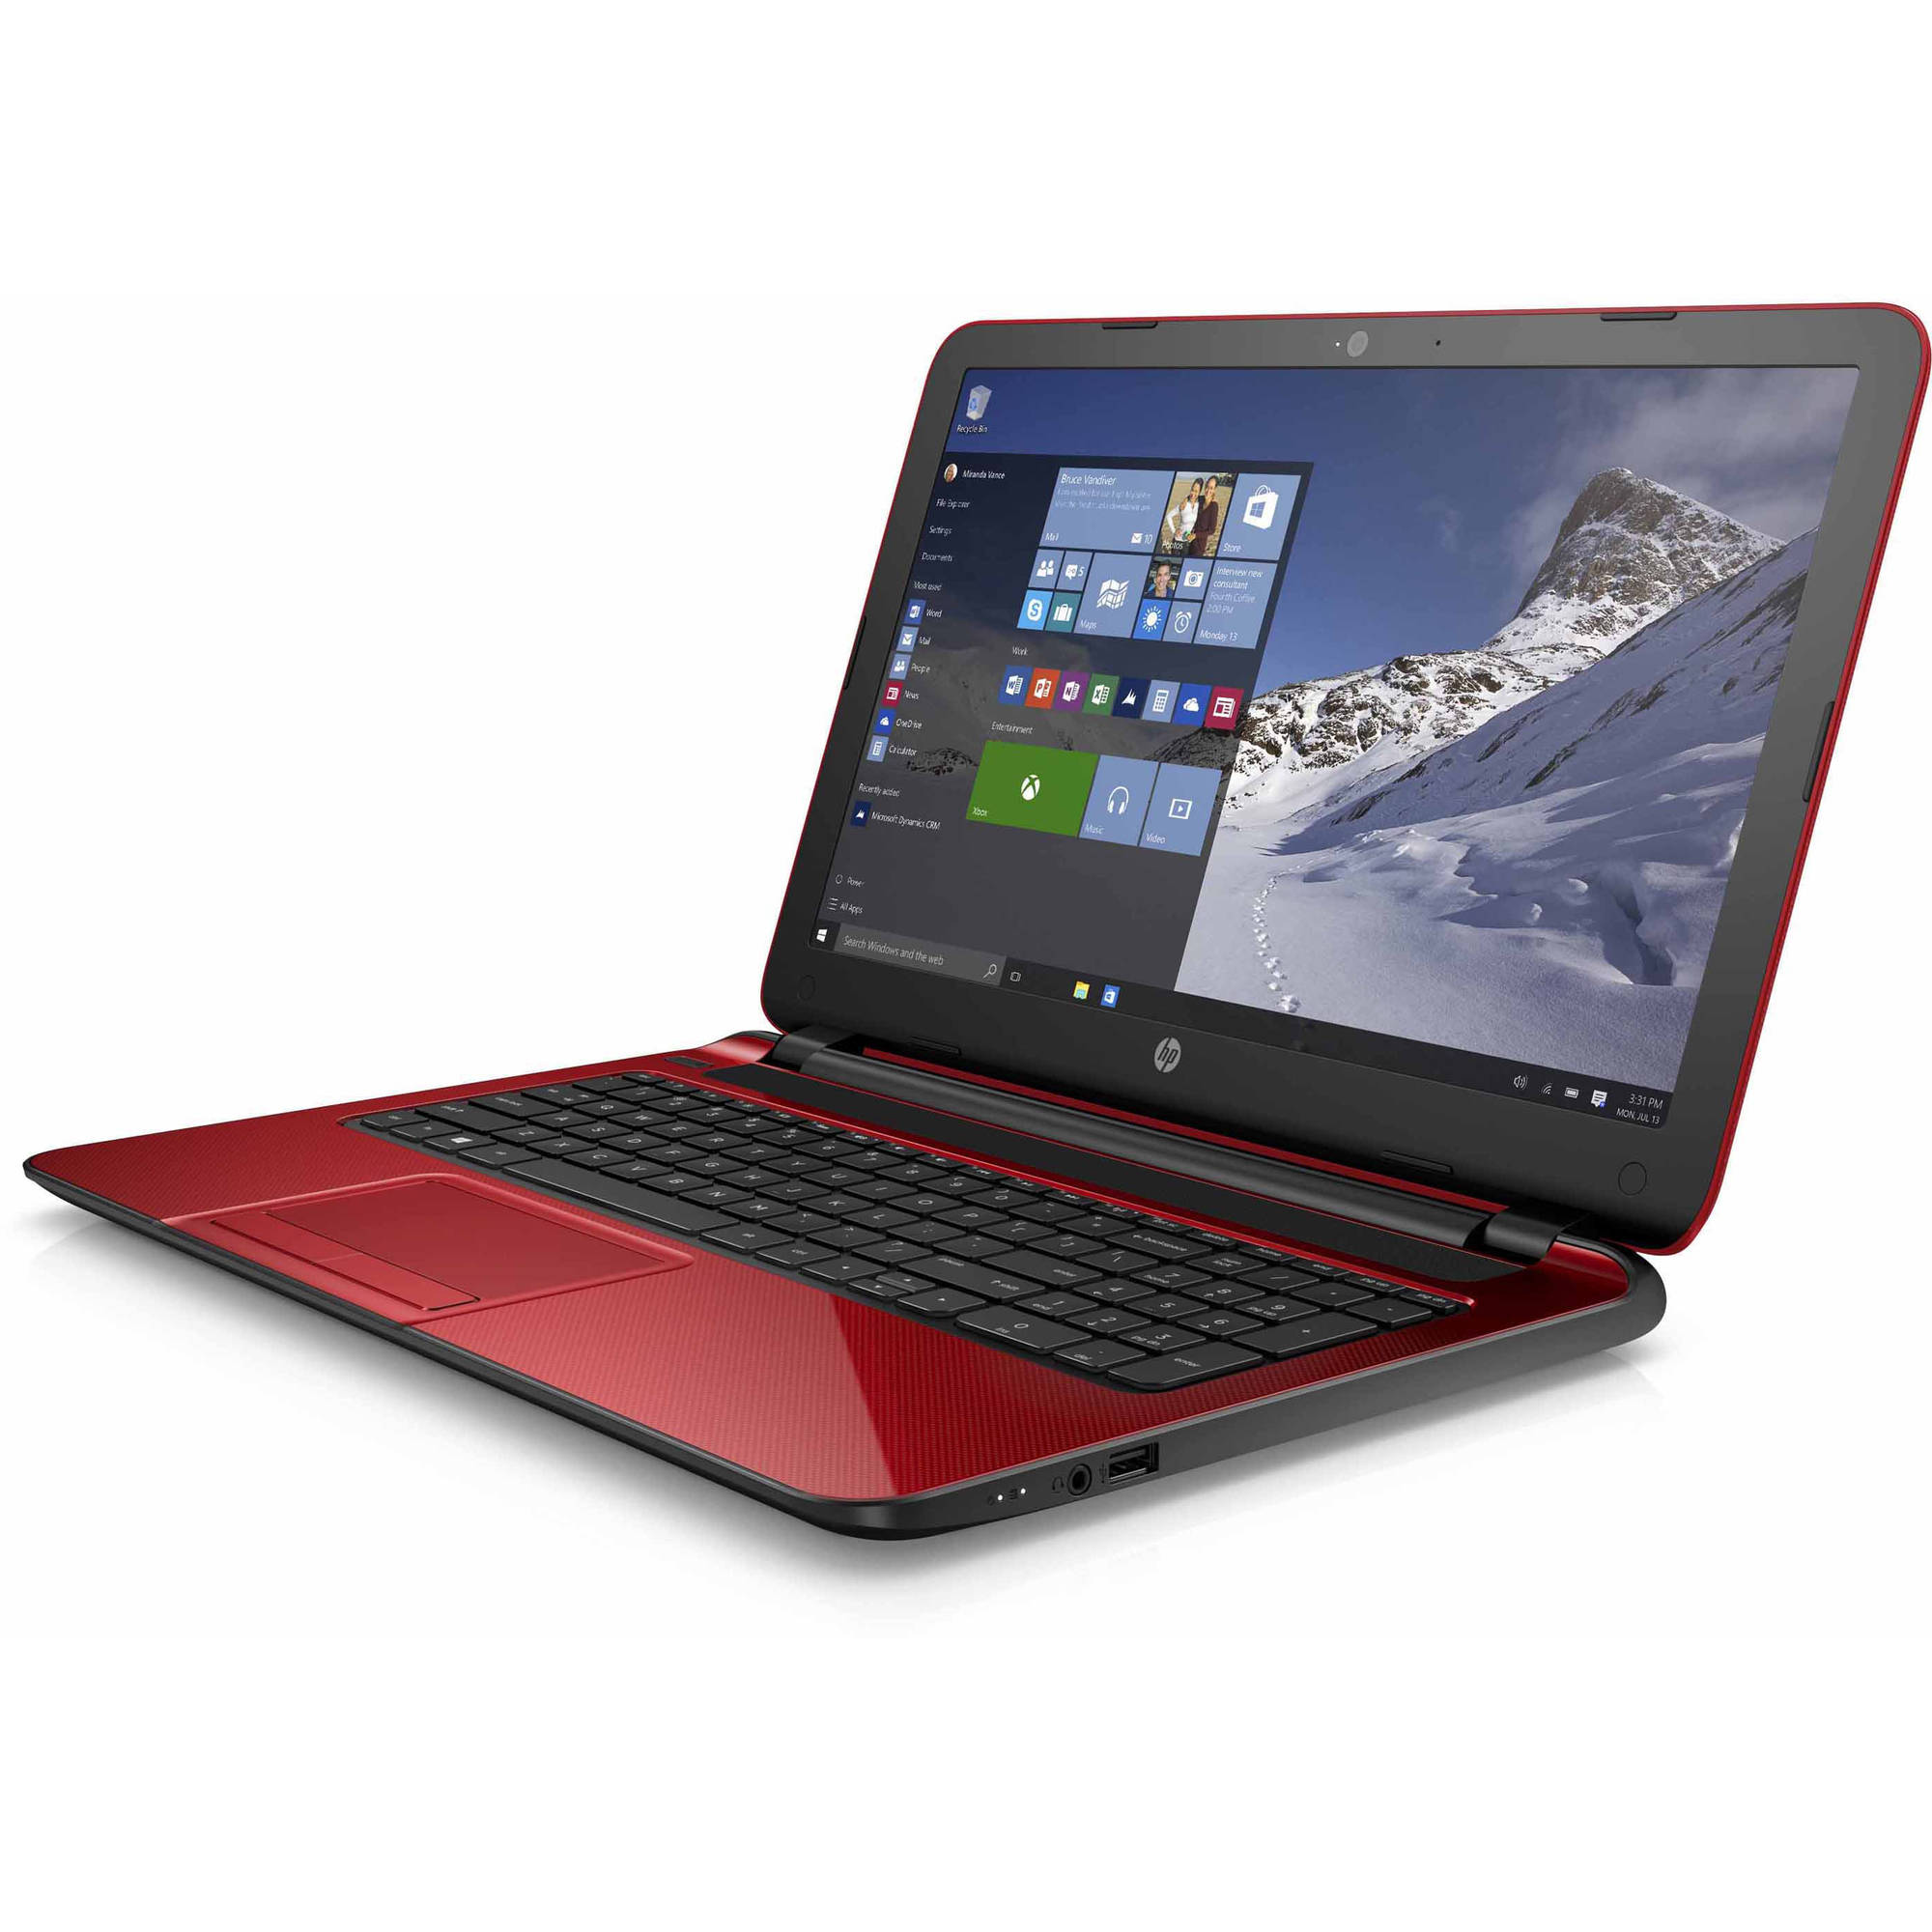 HP Flyer Red 15.6" 15-f272wm Laptop PC with Intel Pentium N3540 Processor, 4GB Memory, 500GB Hard Drive and Windows 10 Home - image 2 of 4